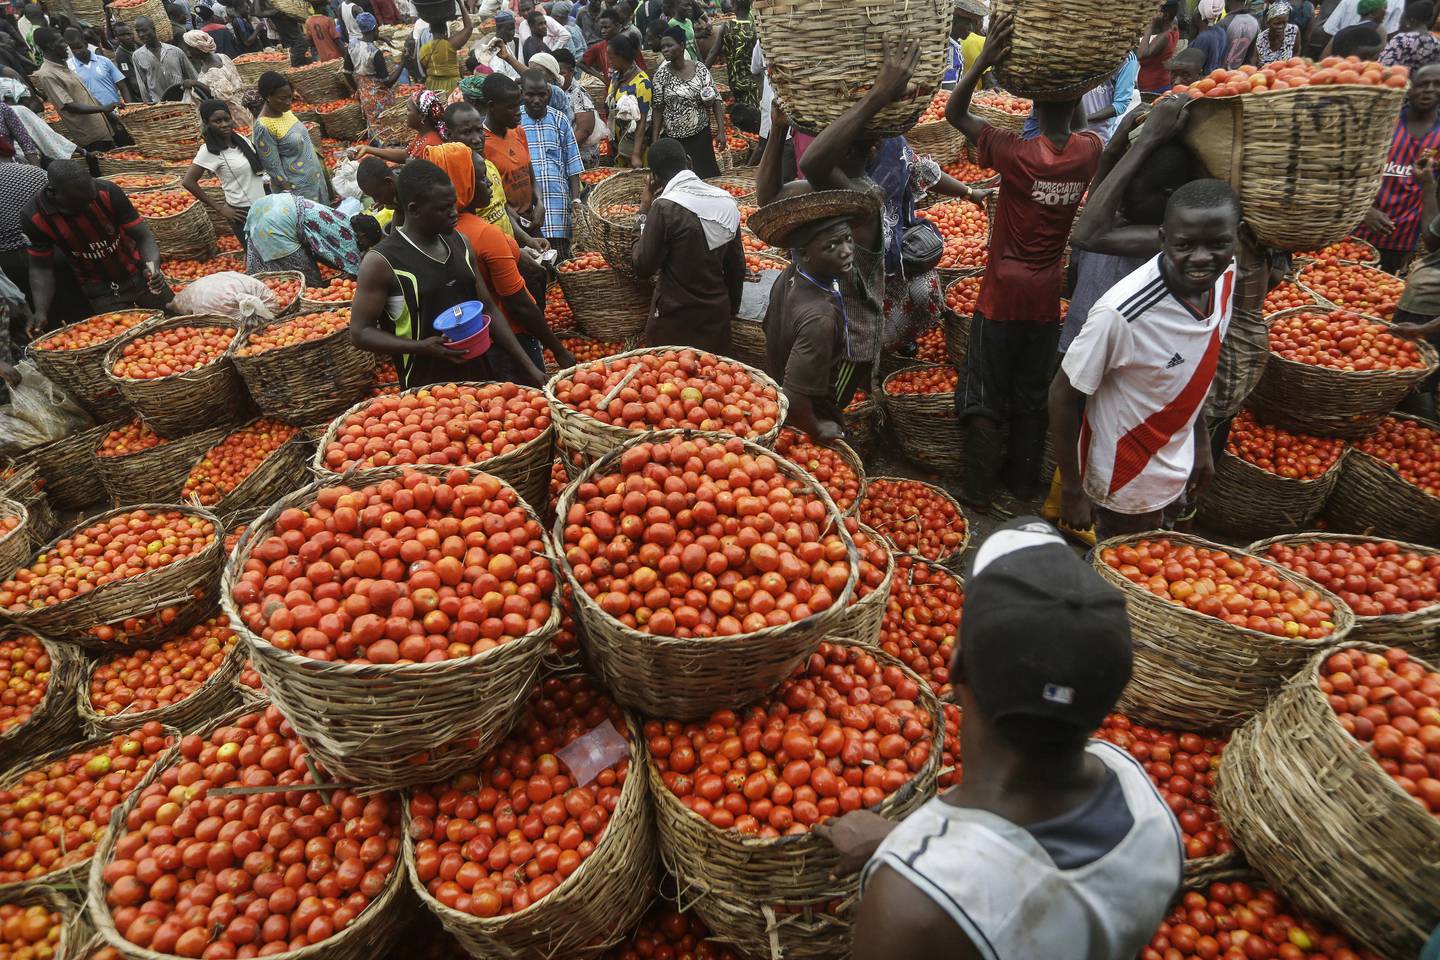 In this photo taken on Friday, April 17, 2020, people buy tomatoes from a vegetable market in the commercial capital Lagos, Nigeria. Lockdowns in Africa limiting the movement of people in an attempt to slow the spread of the coronavirus are threatening to choke off supplies of what the continent needs the most - food. (AP Photo/Sunday Alamba)